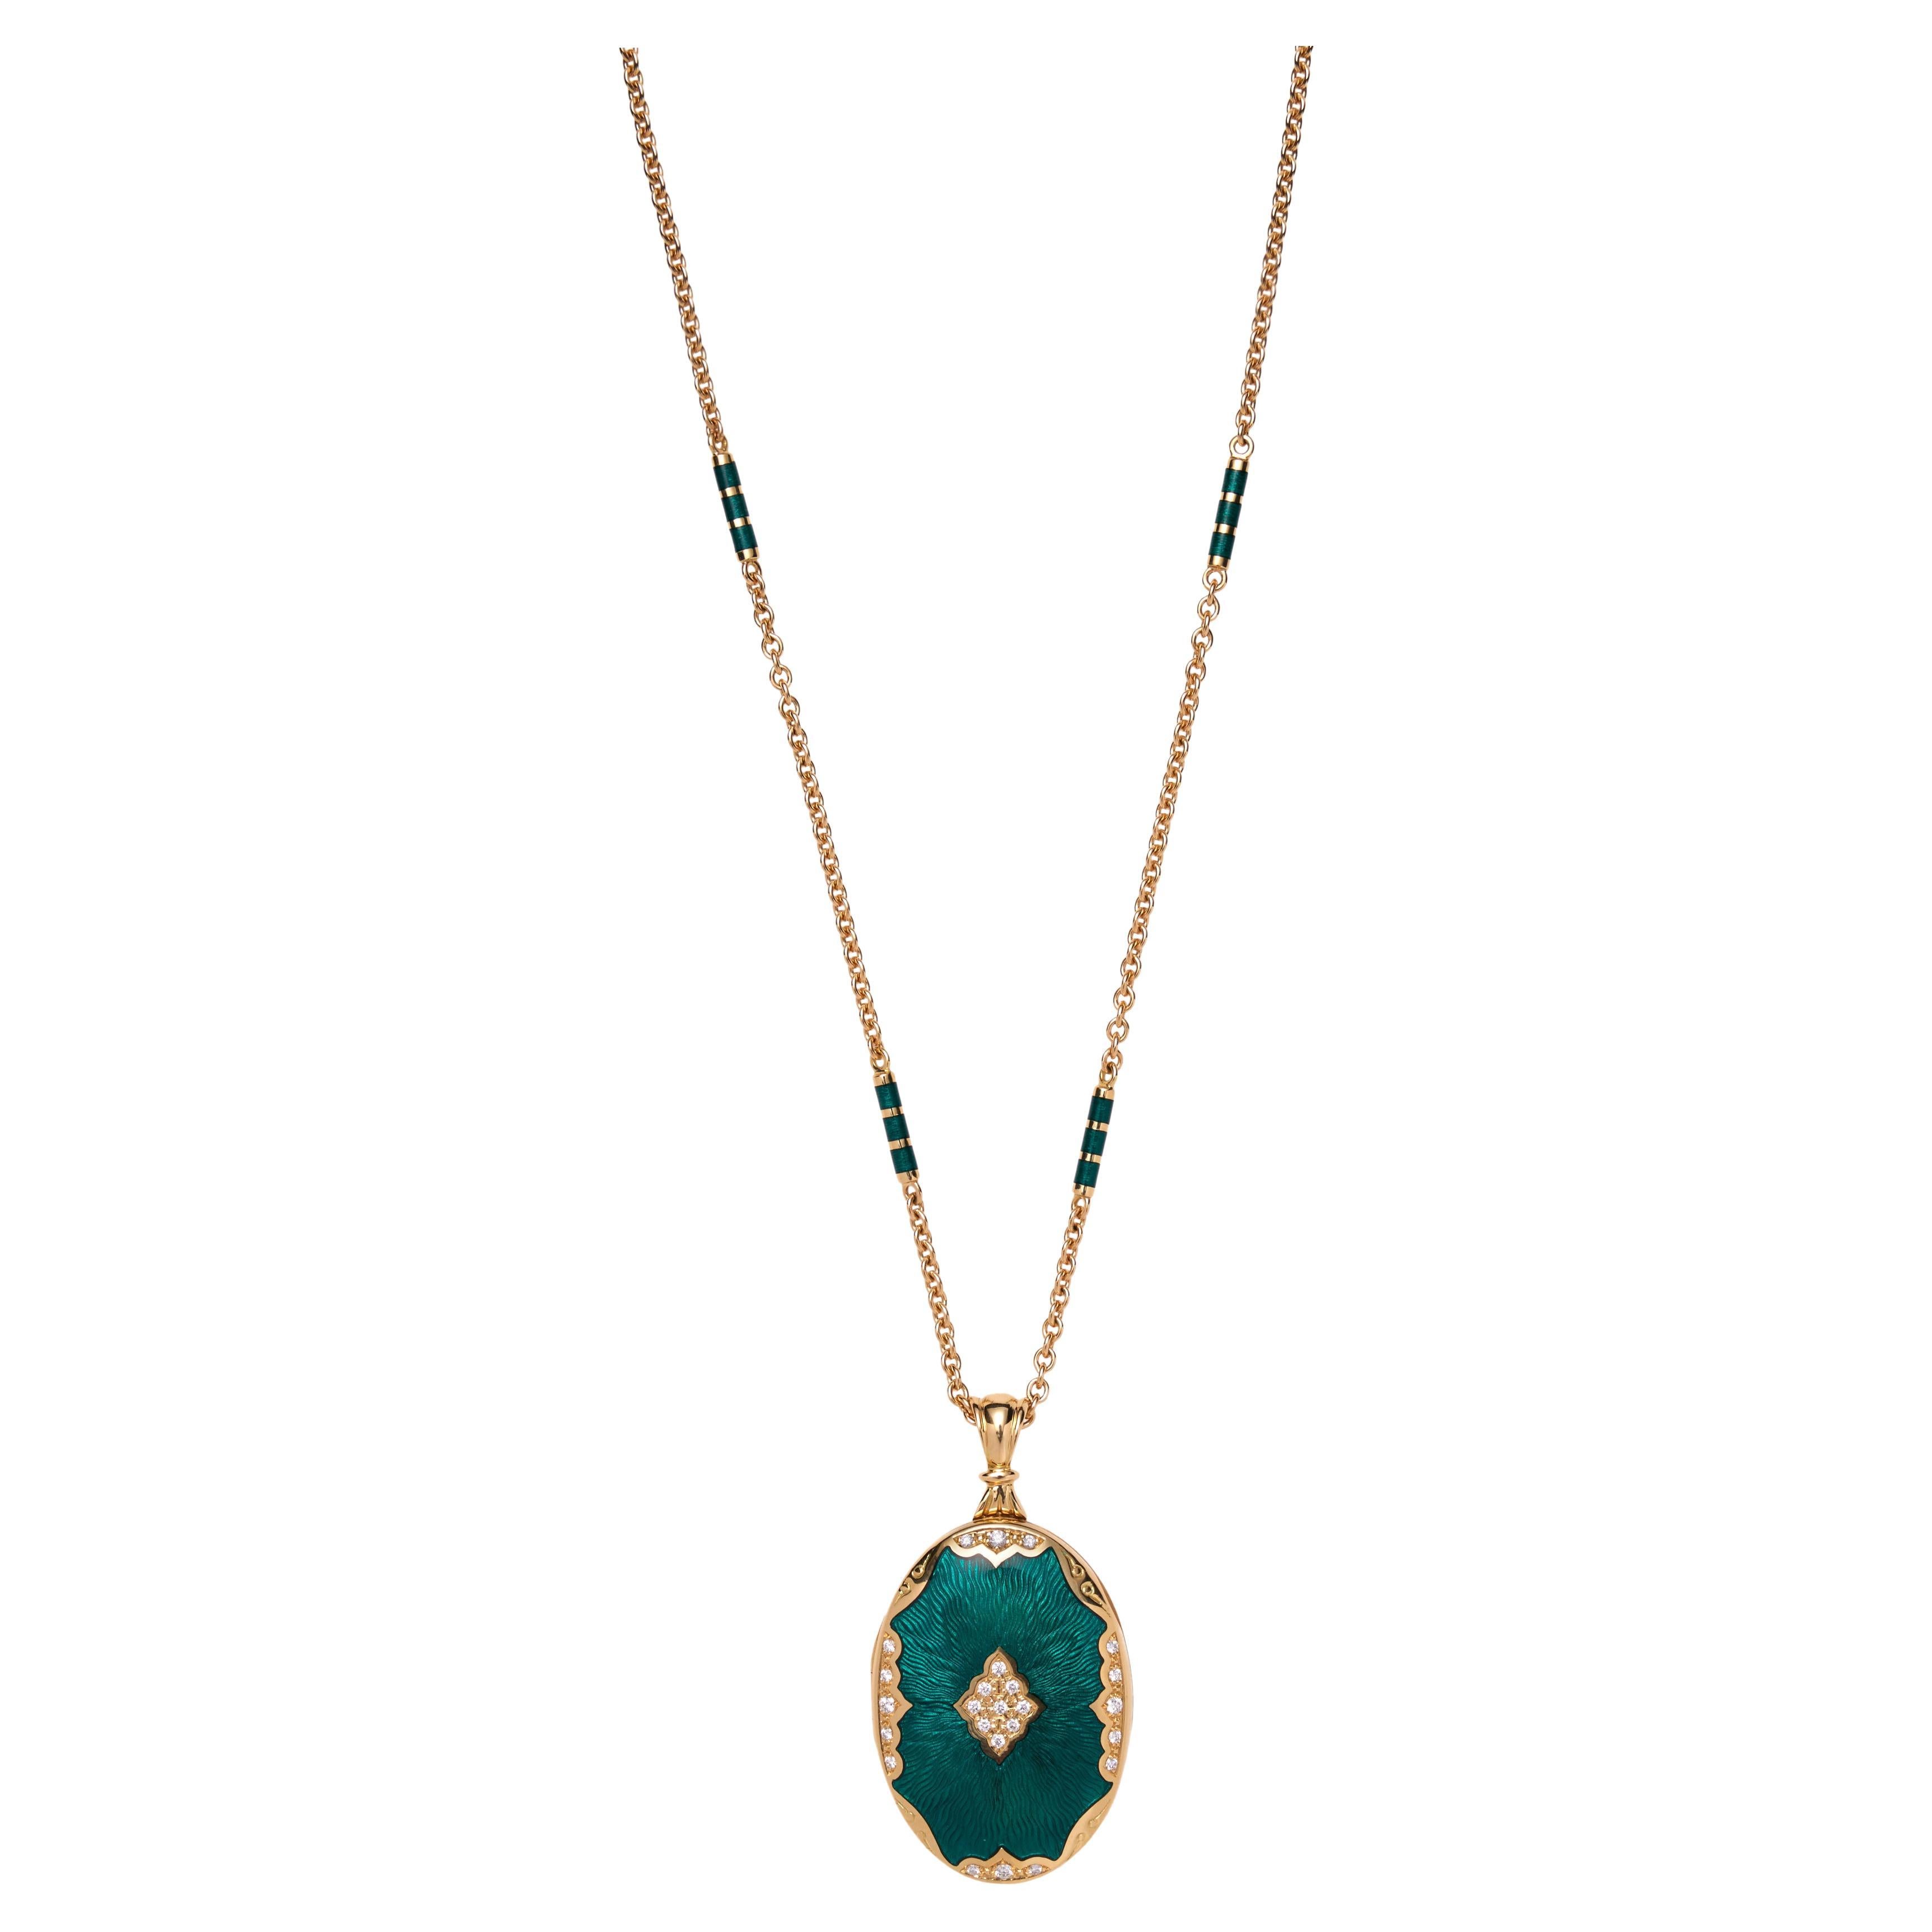 18 Karat Yellow Gold Locket with Green Ename and Diamonds on Chain with Enamel For Sale